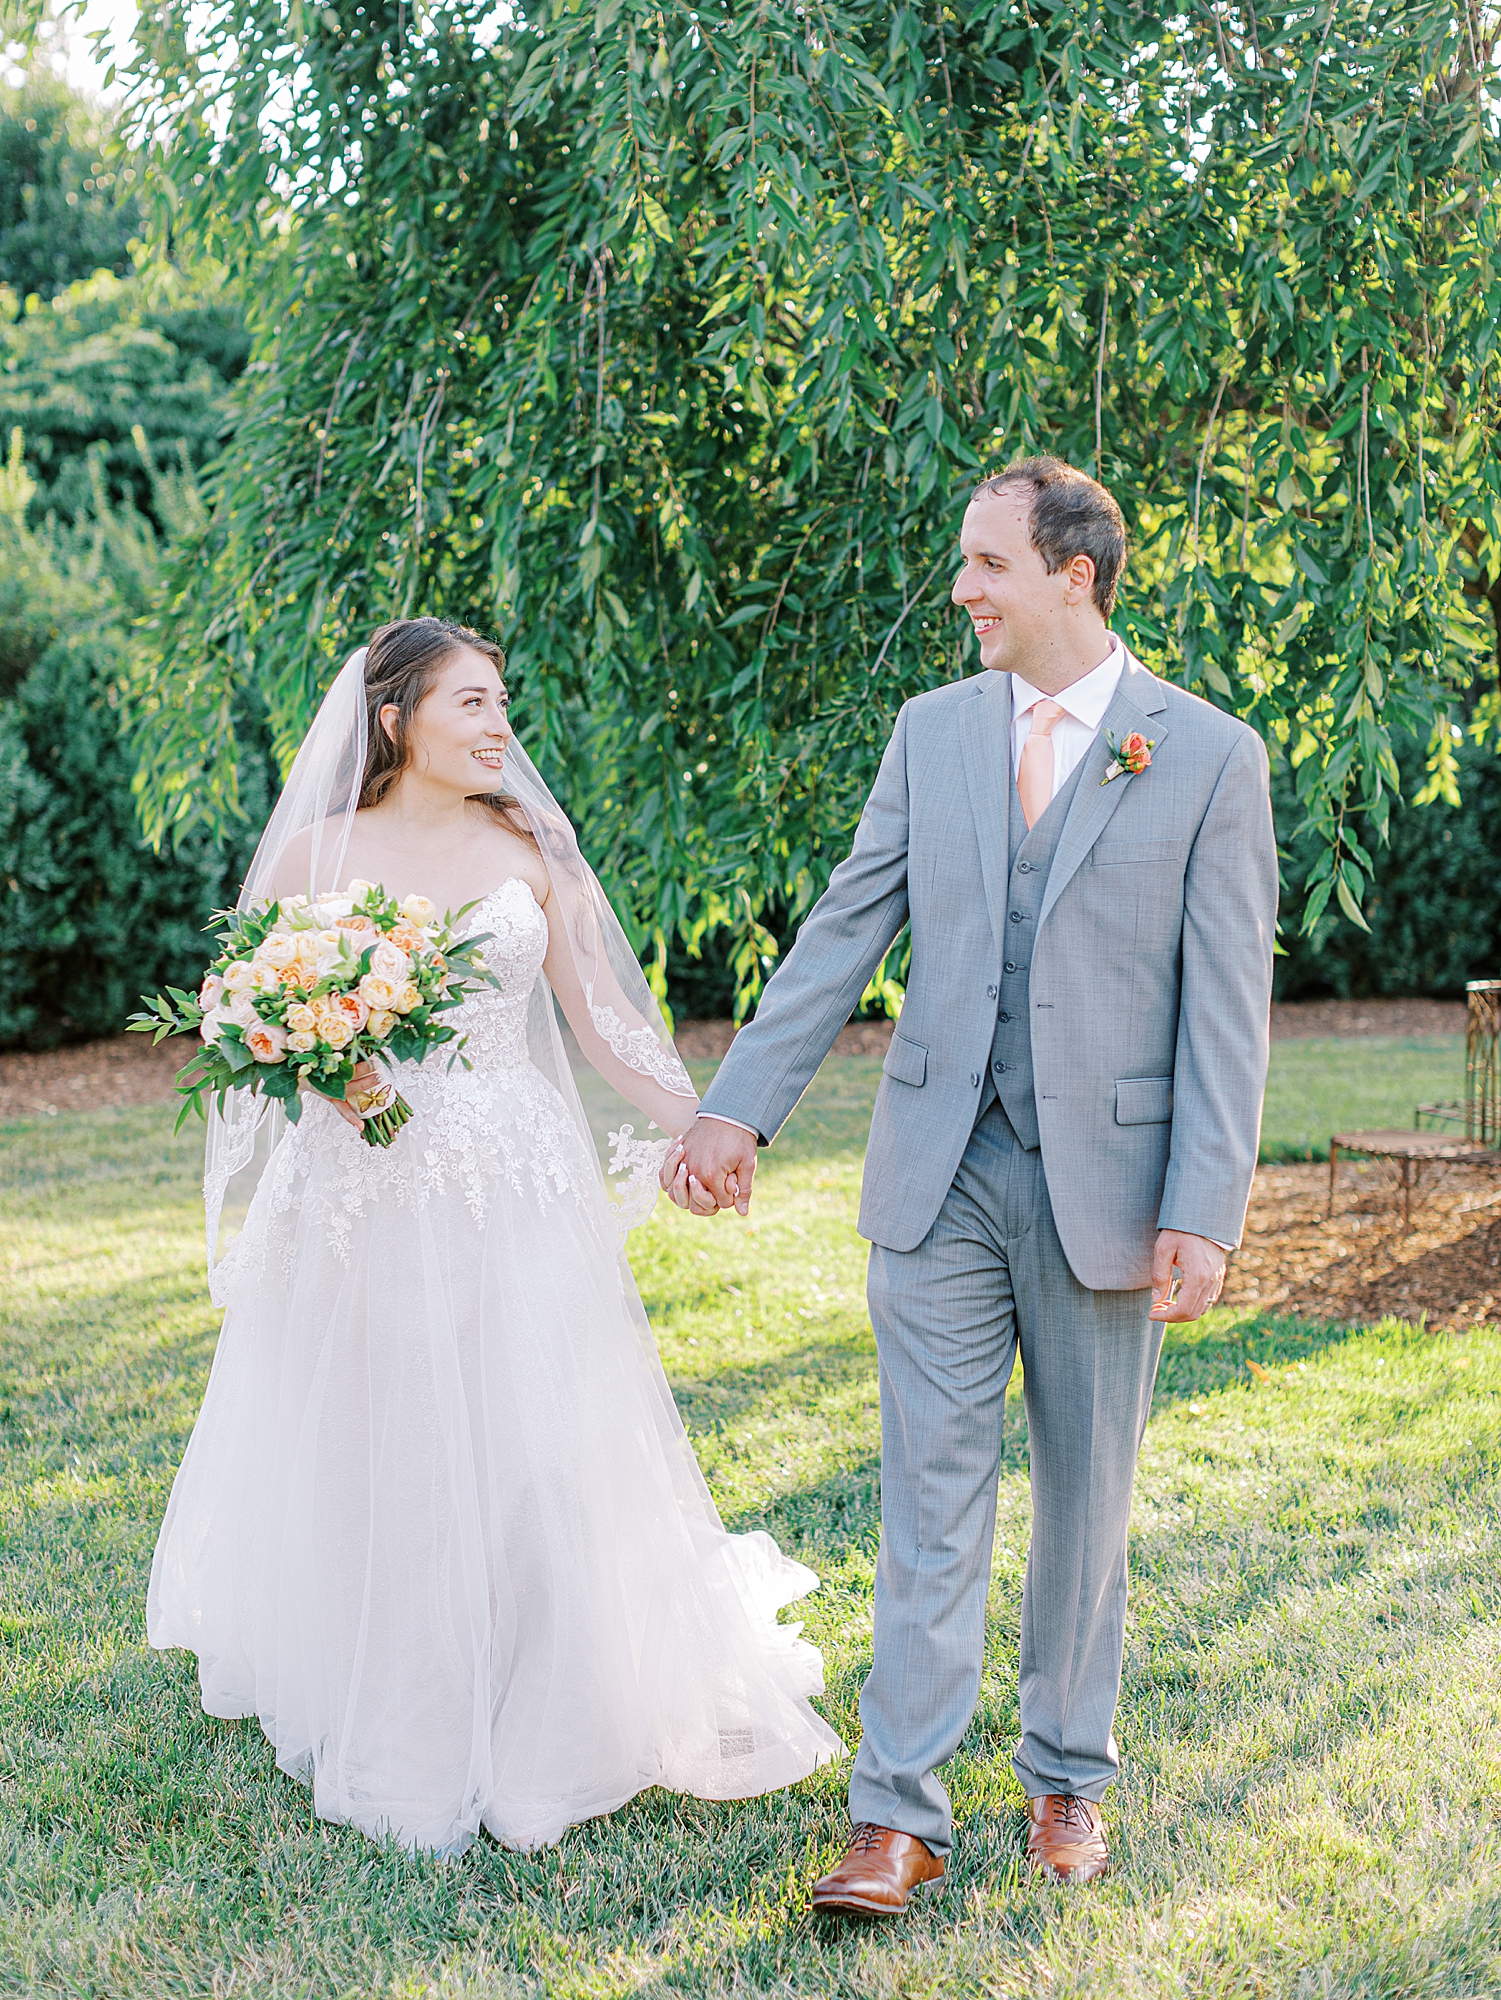 Bride holding coral and light pink bouquet walking with groom in grey tux and pink tie.